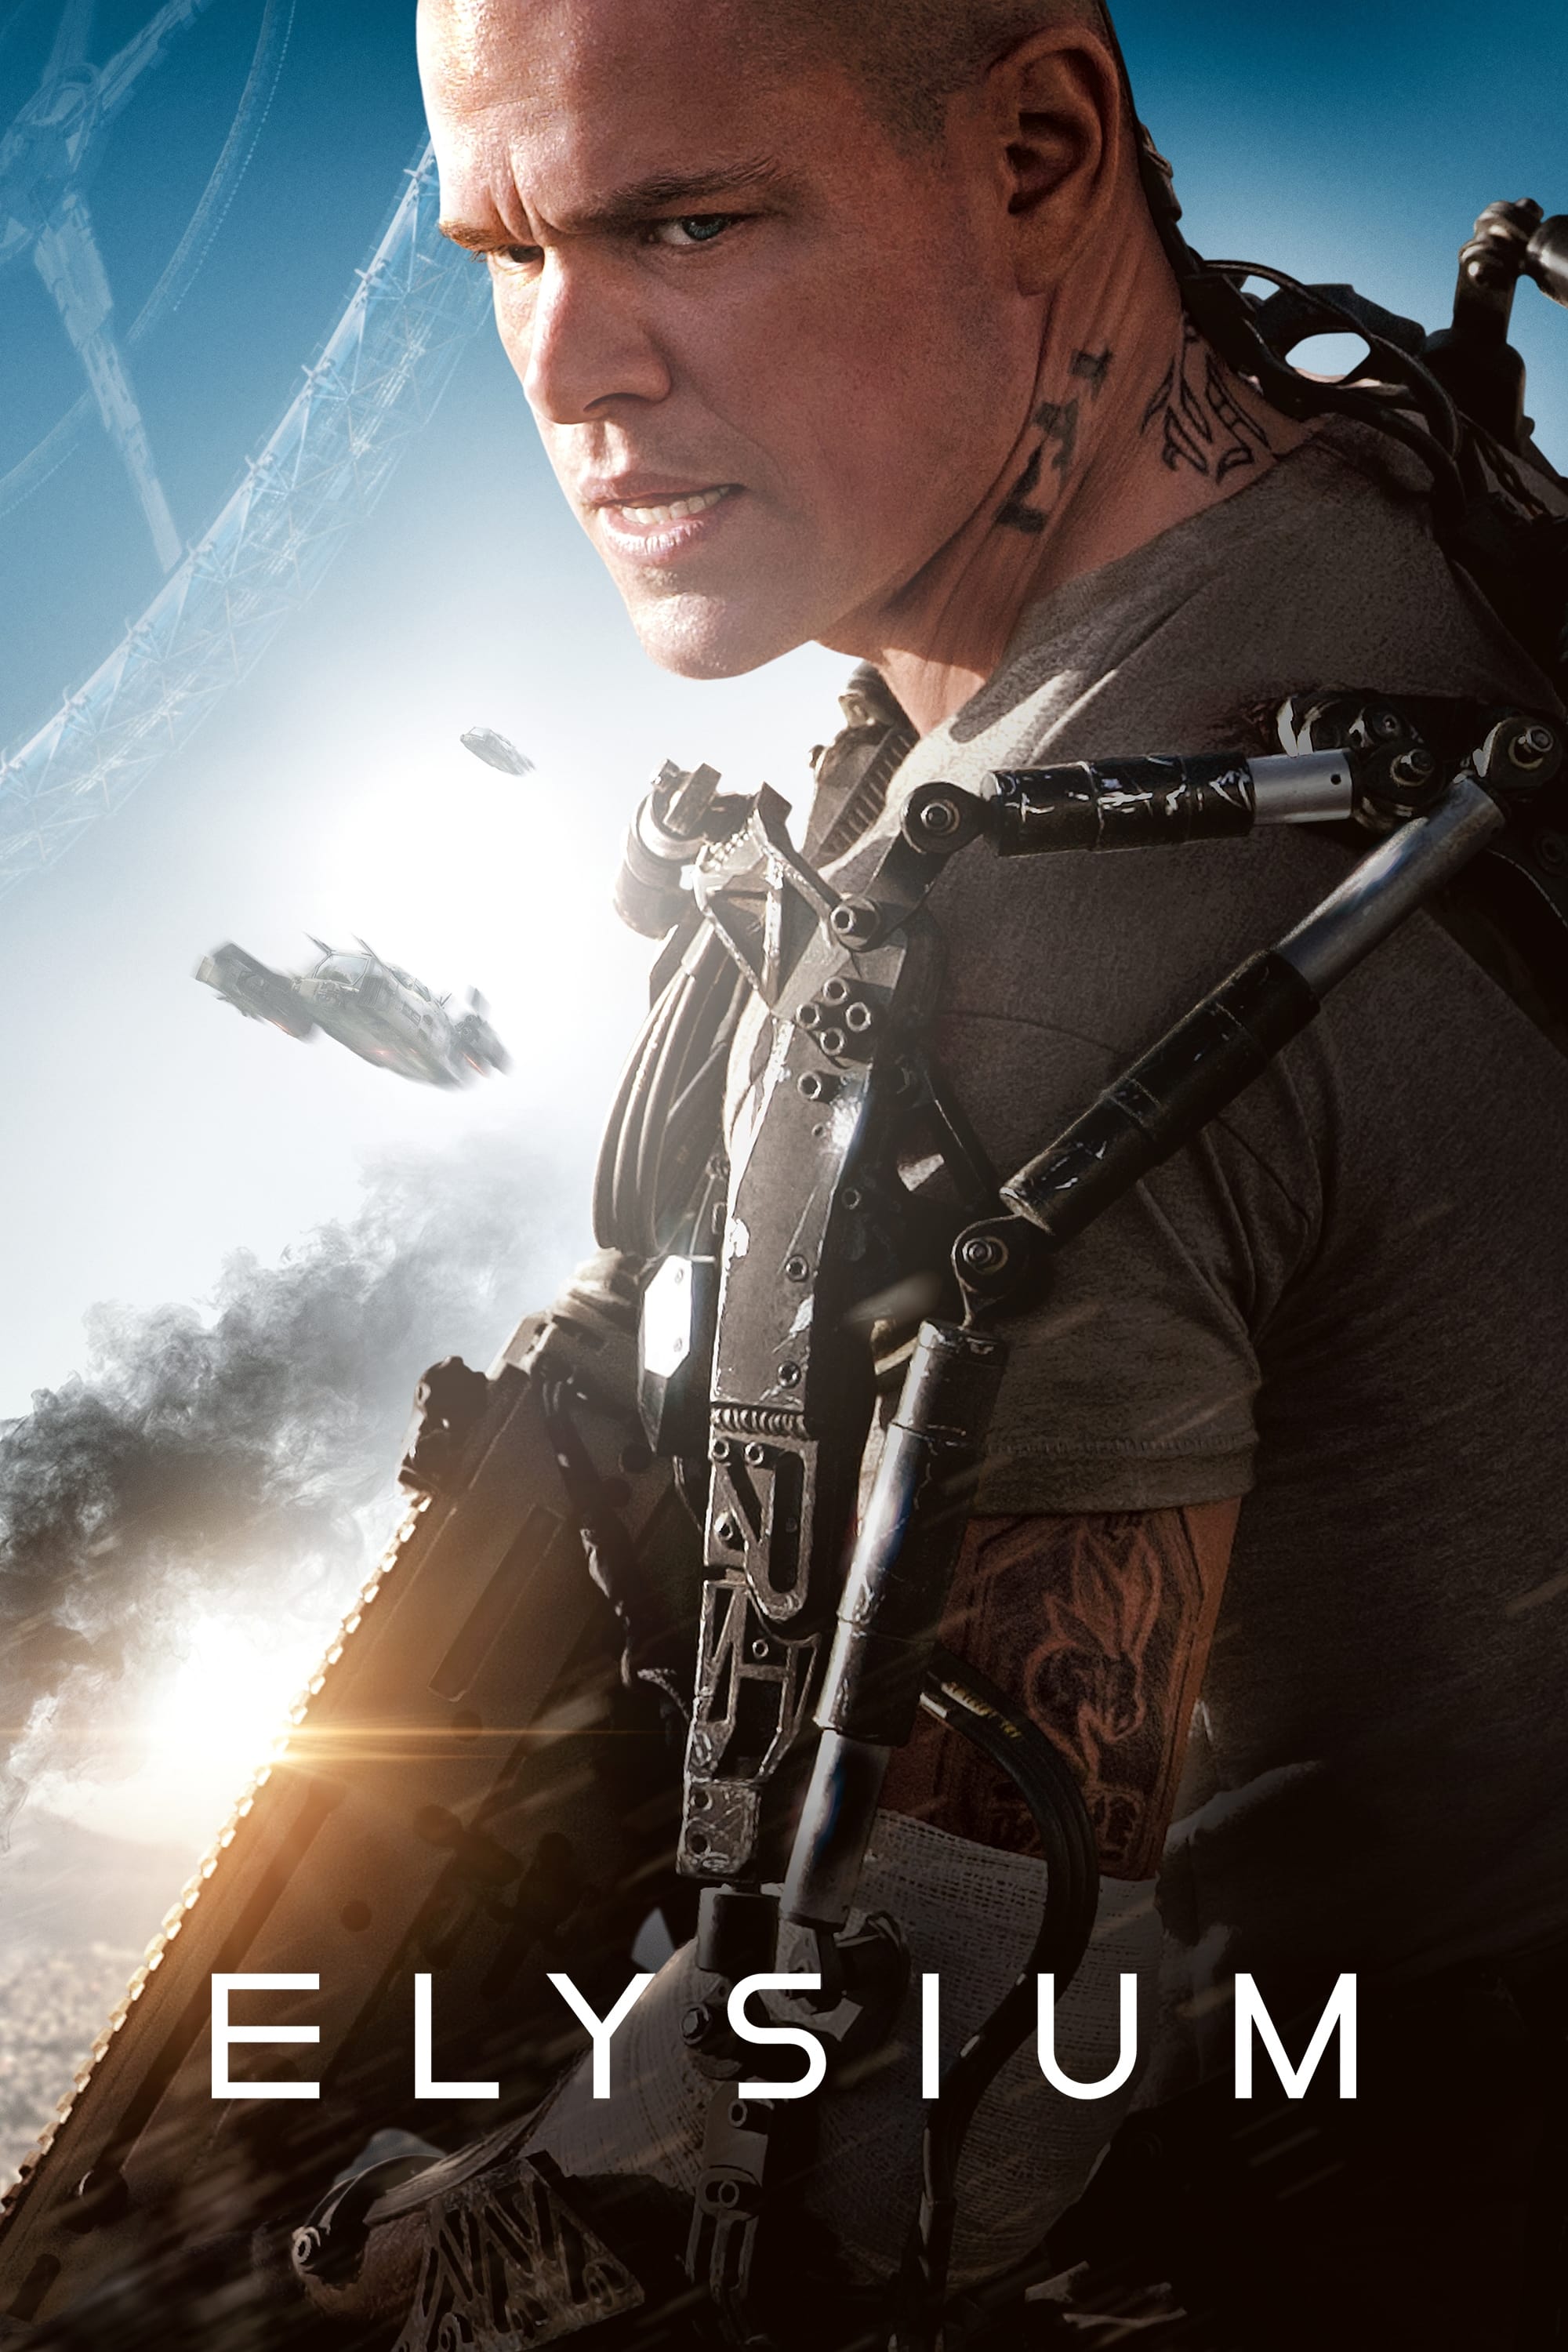 Elysium movie download in tamil a course in miracles made easy download pdf